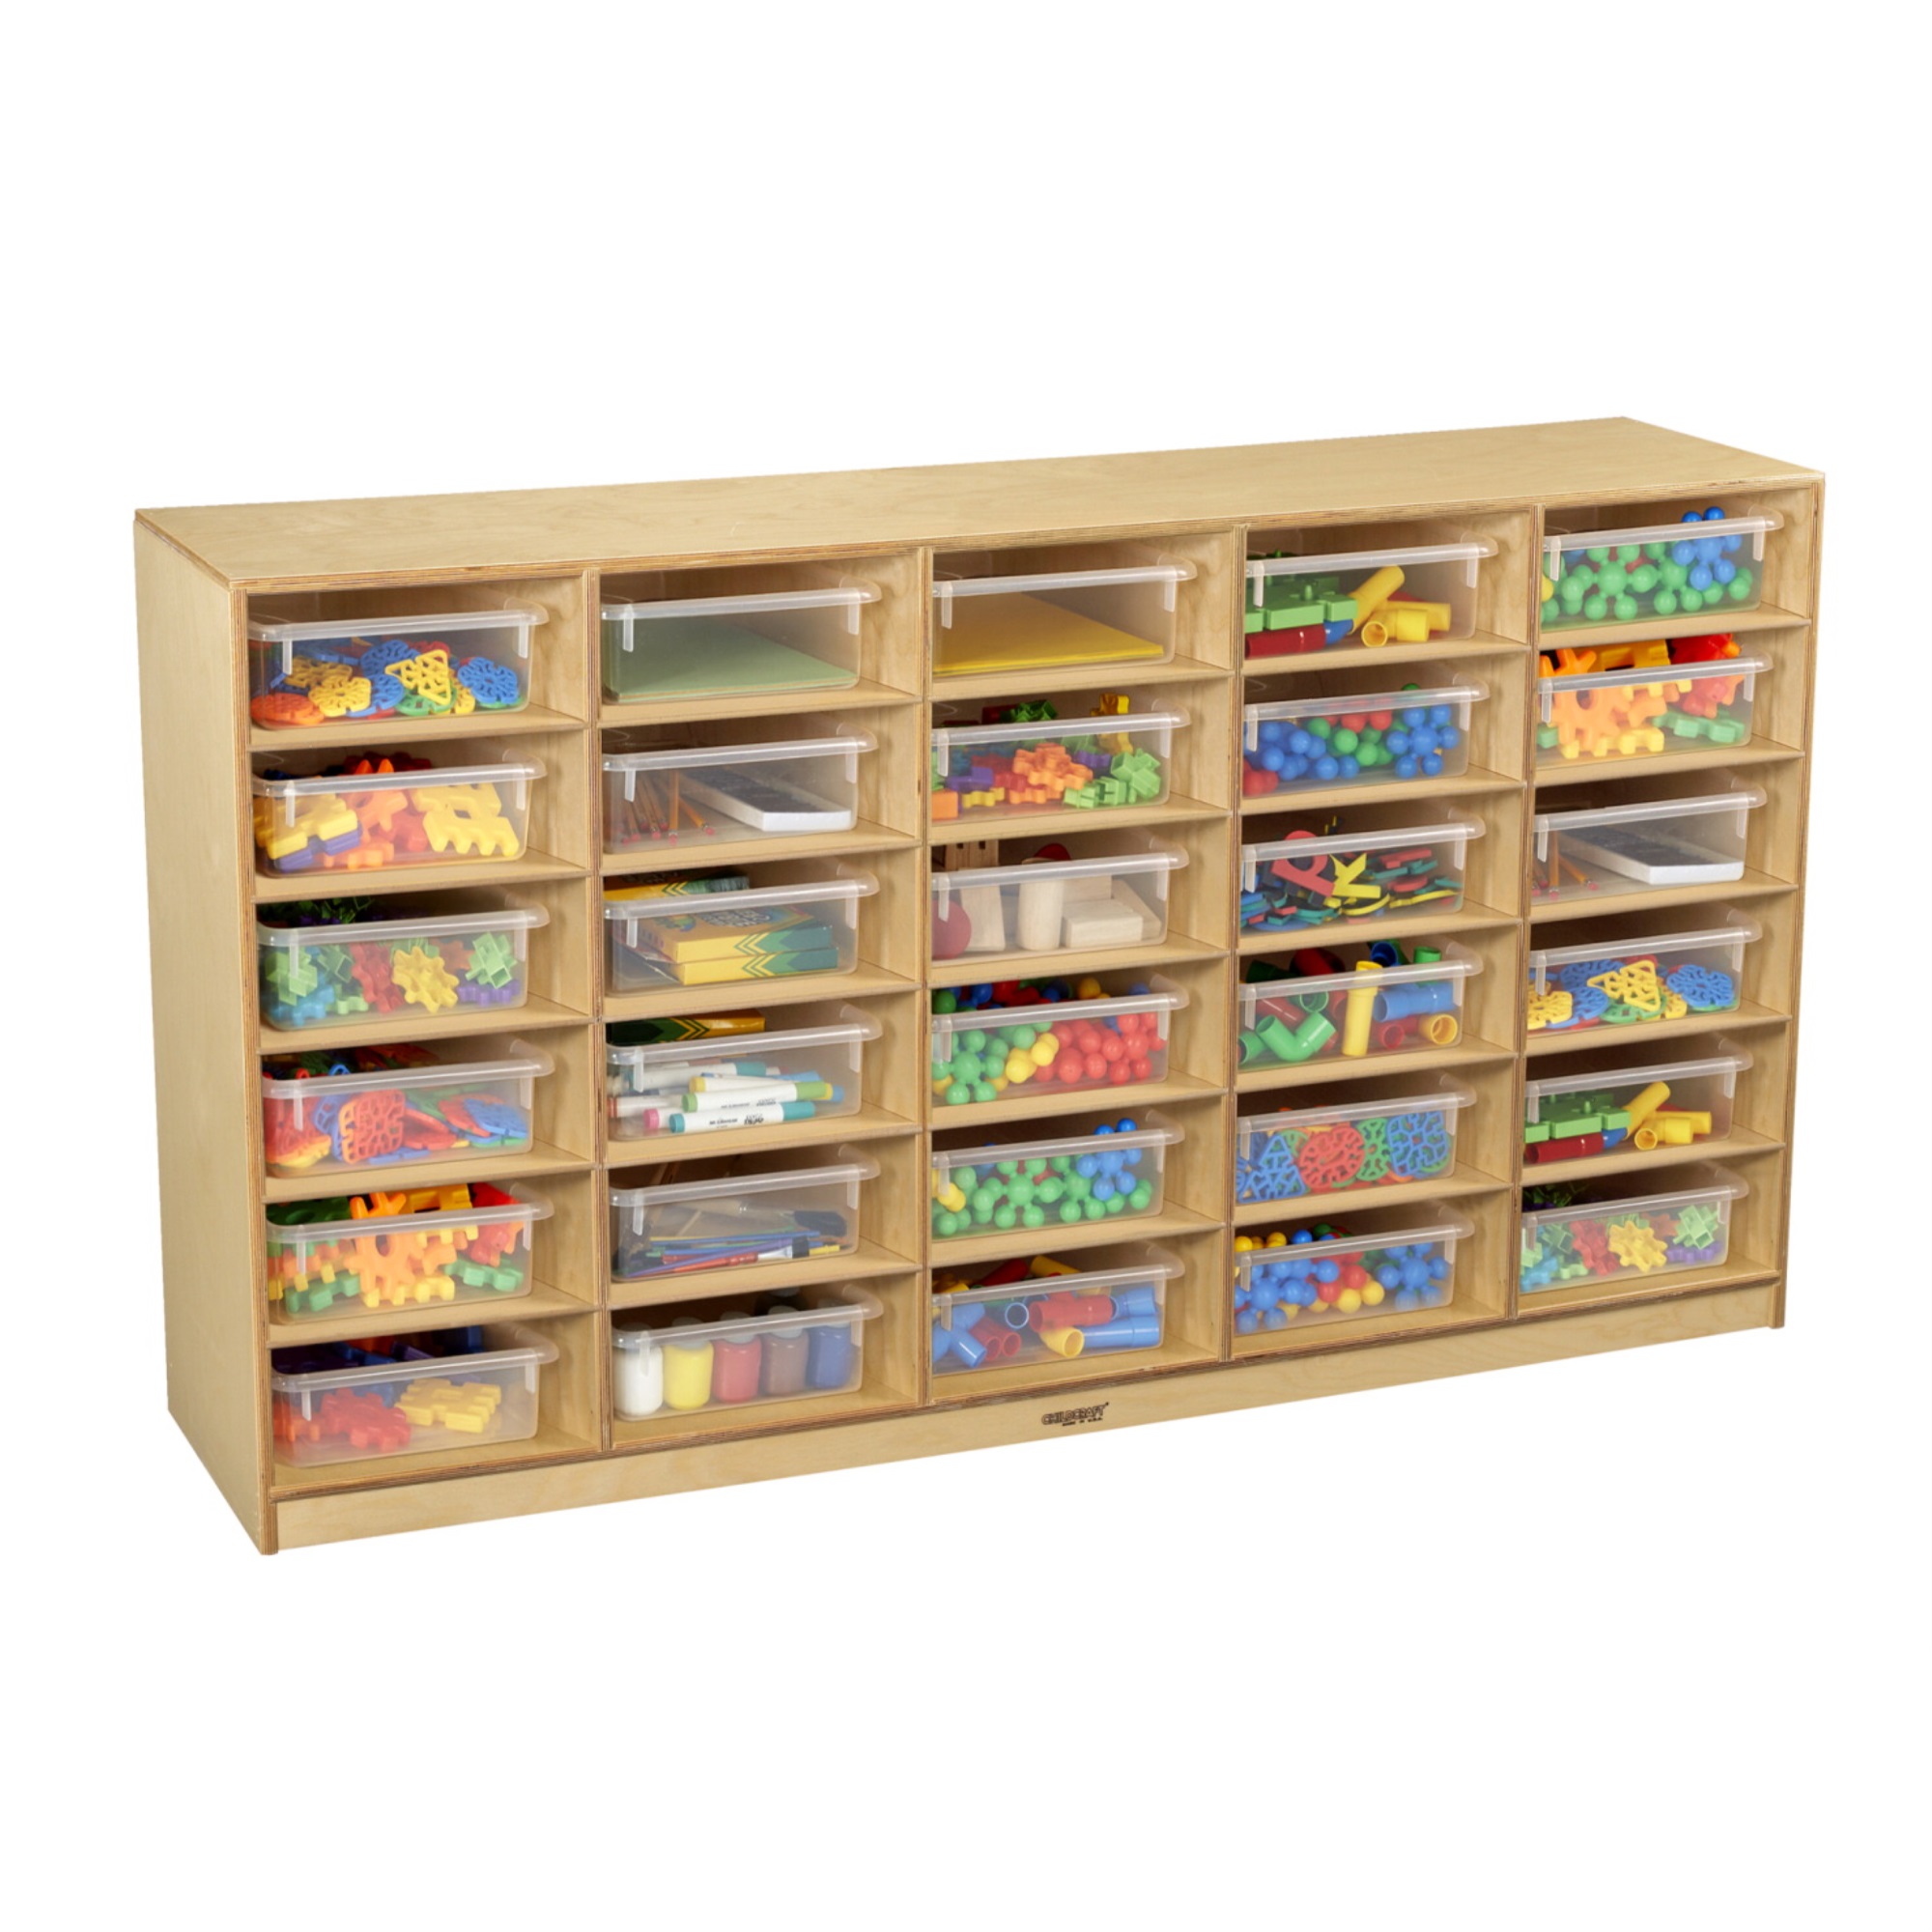 Childcraft Mobile Cubby Unit, 30 Clear Storage Trays, 58-3/8 x 14-1/4 x 30 Inches